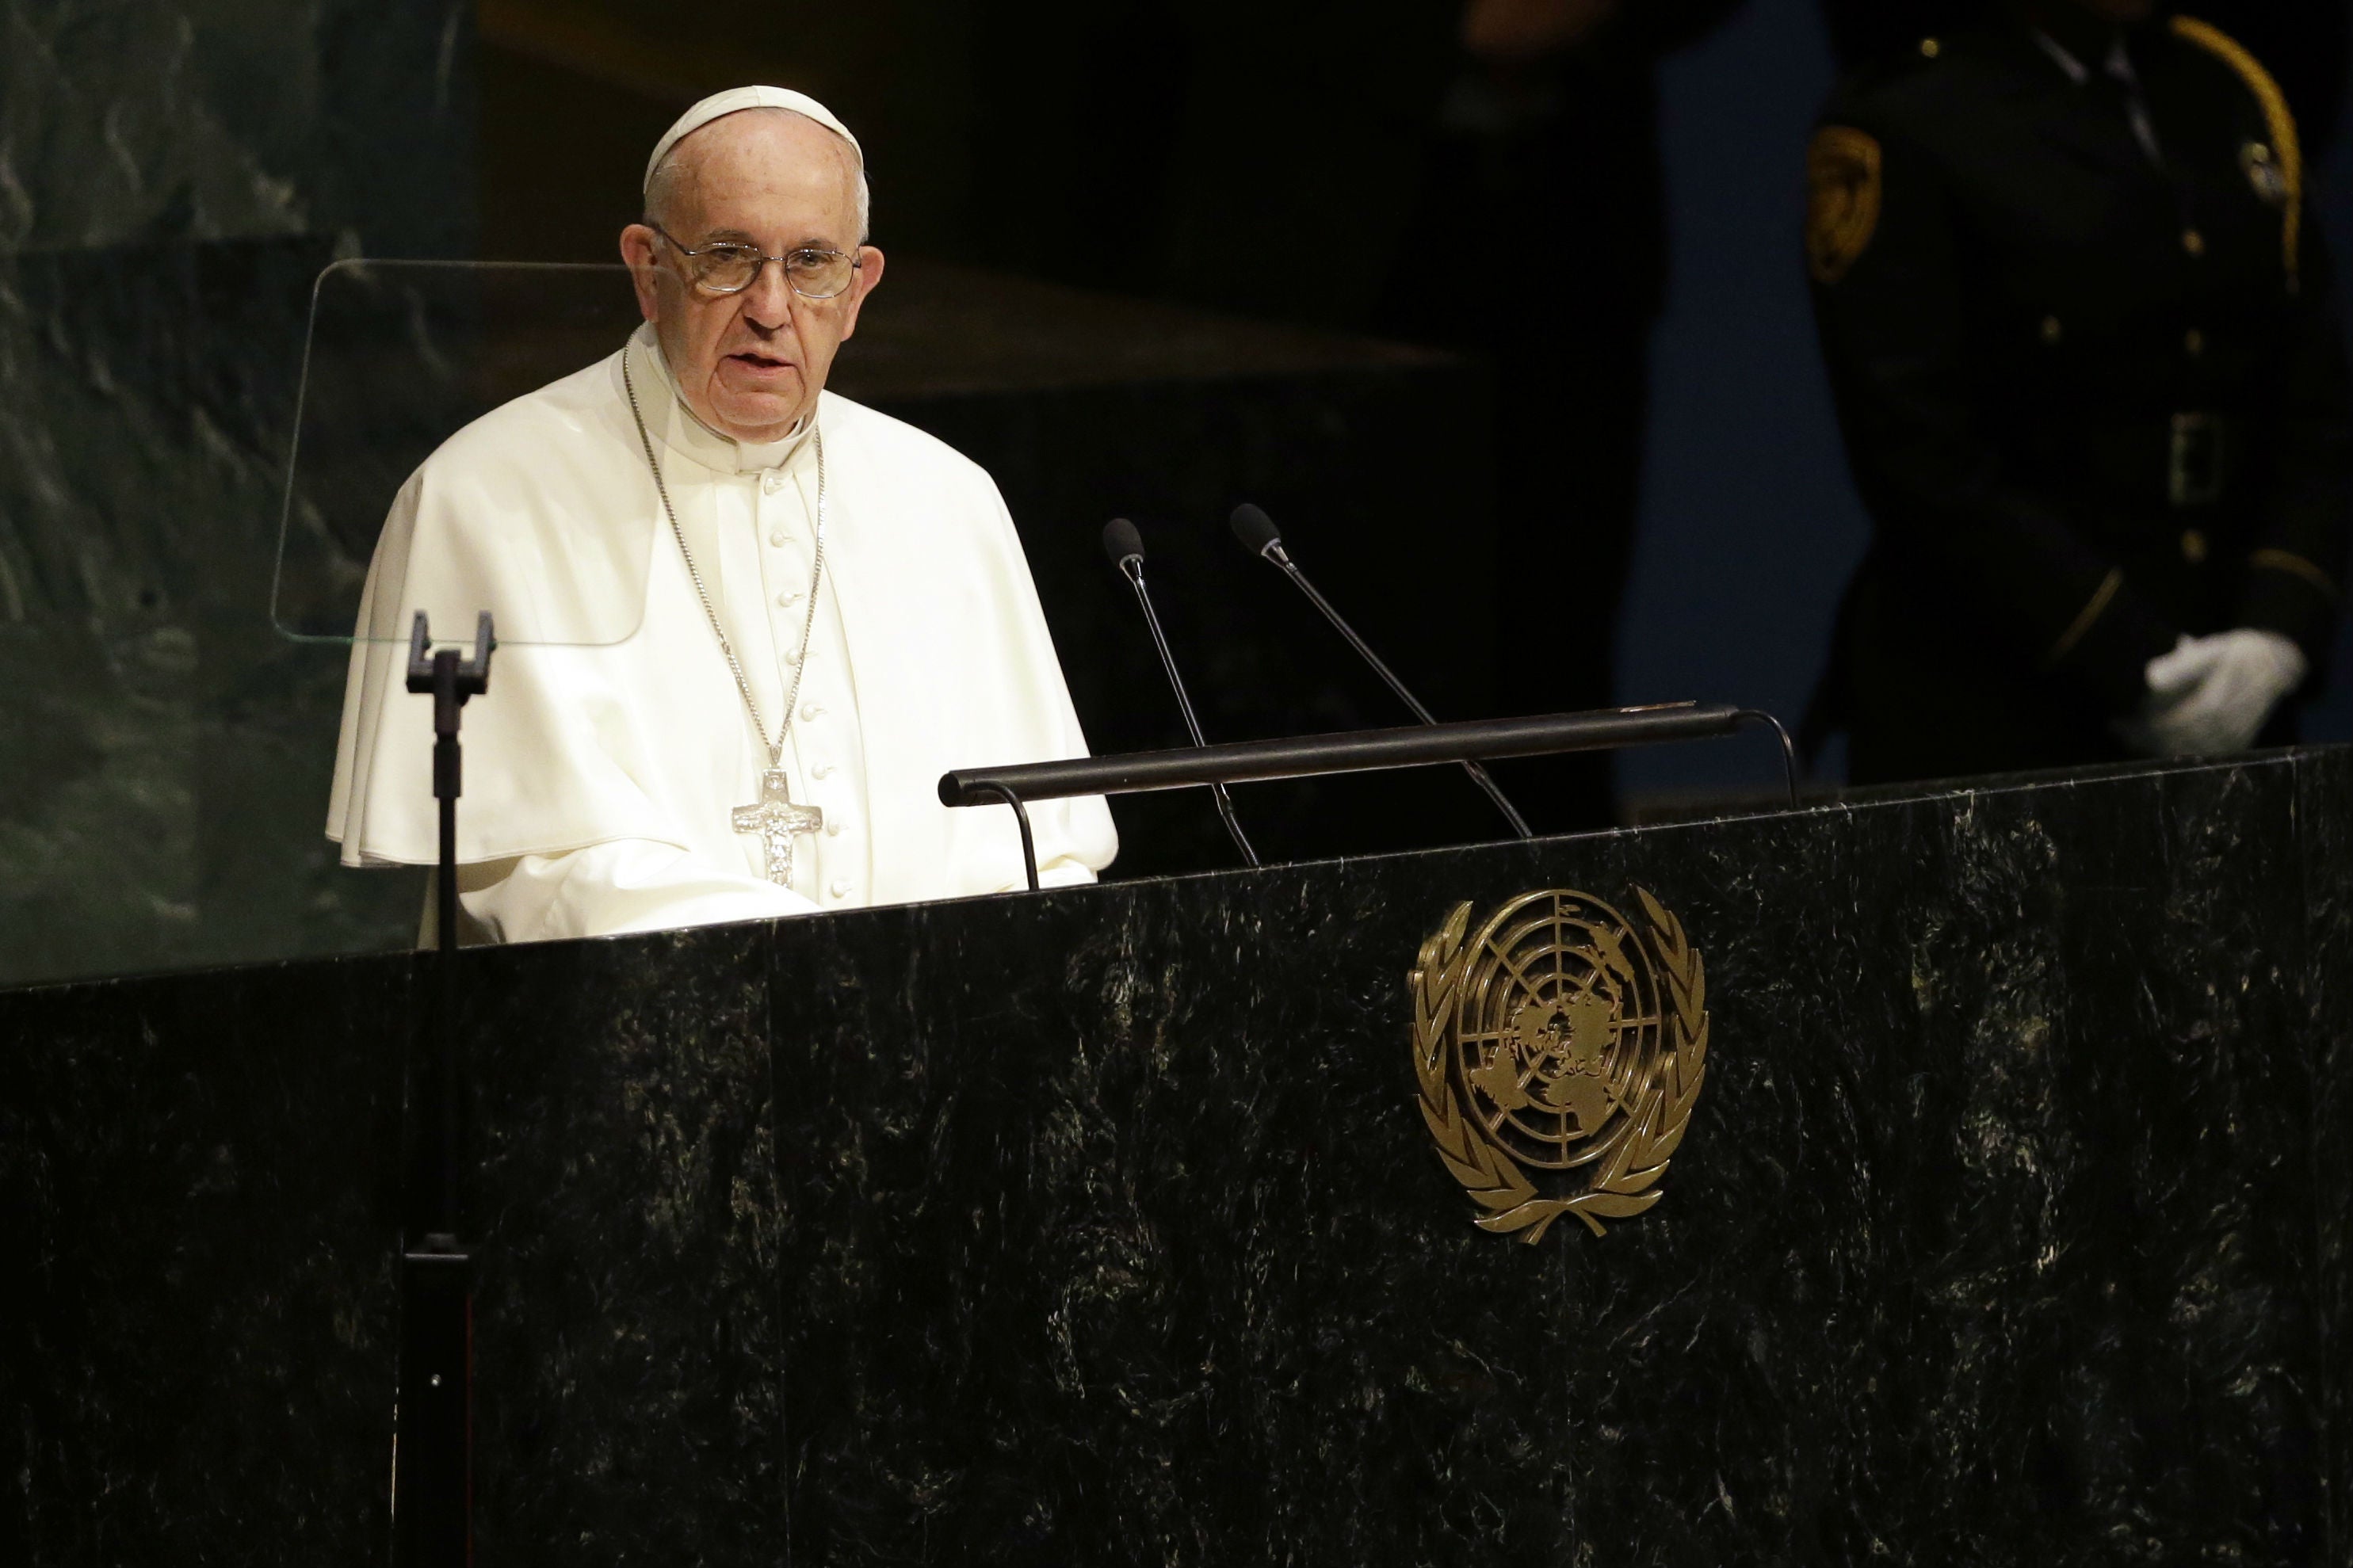 Pope Francis was the fifth pope to address the UN General Assembly